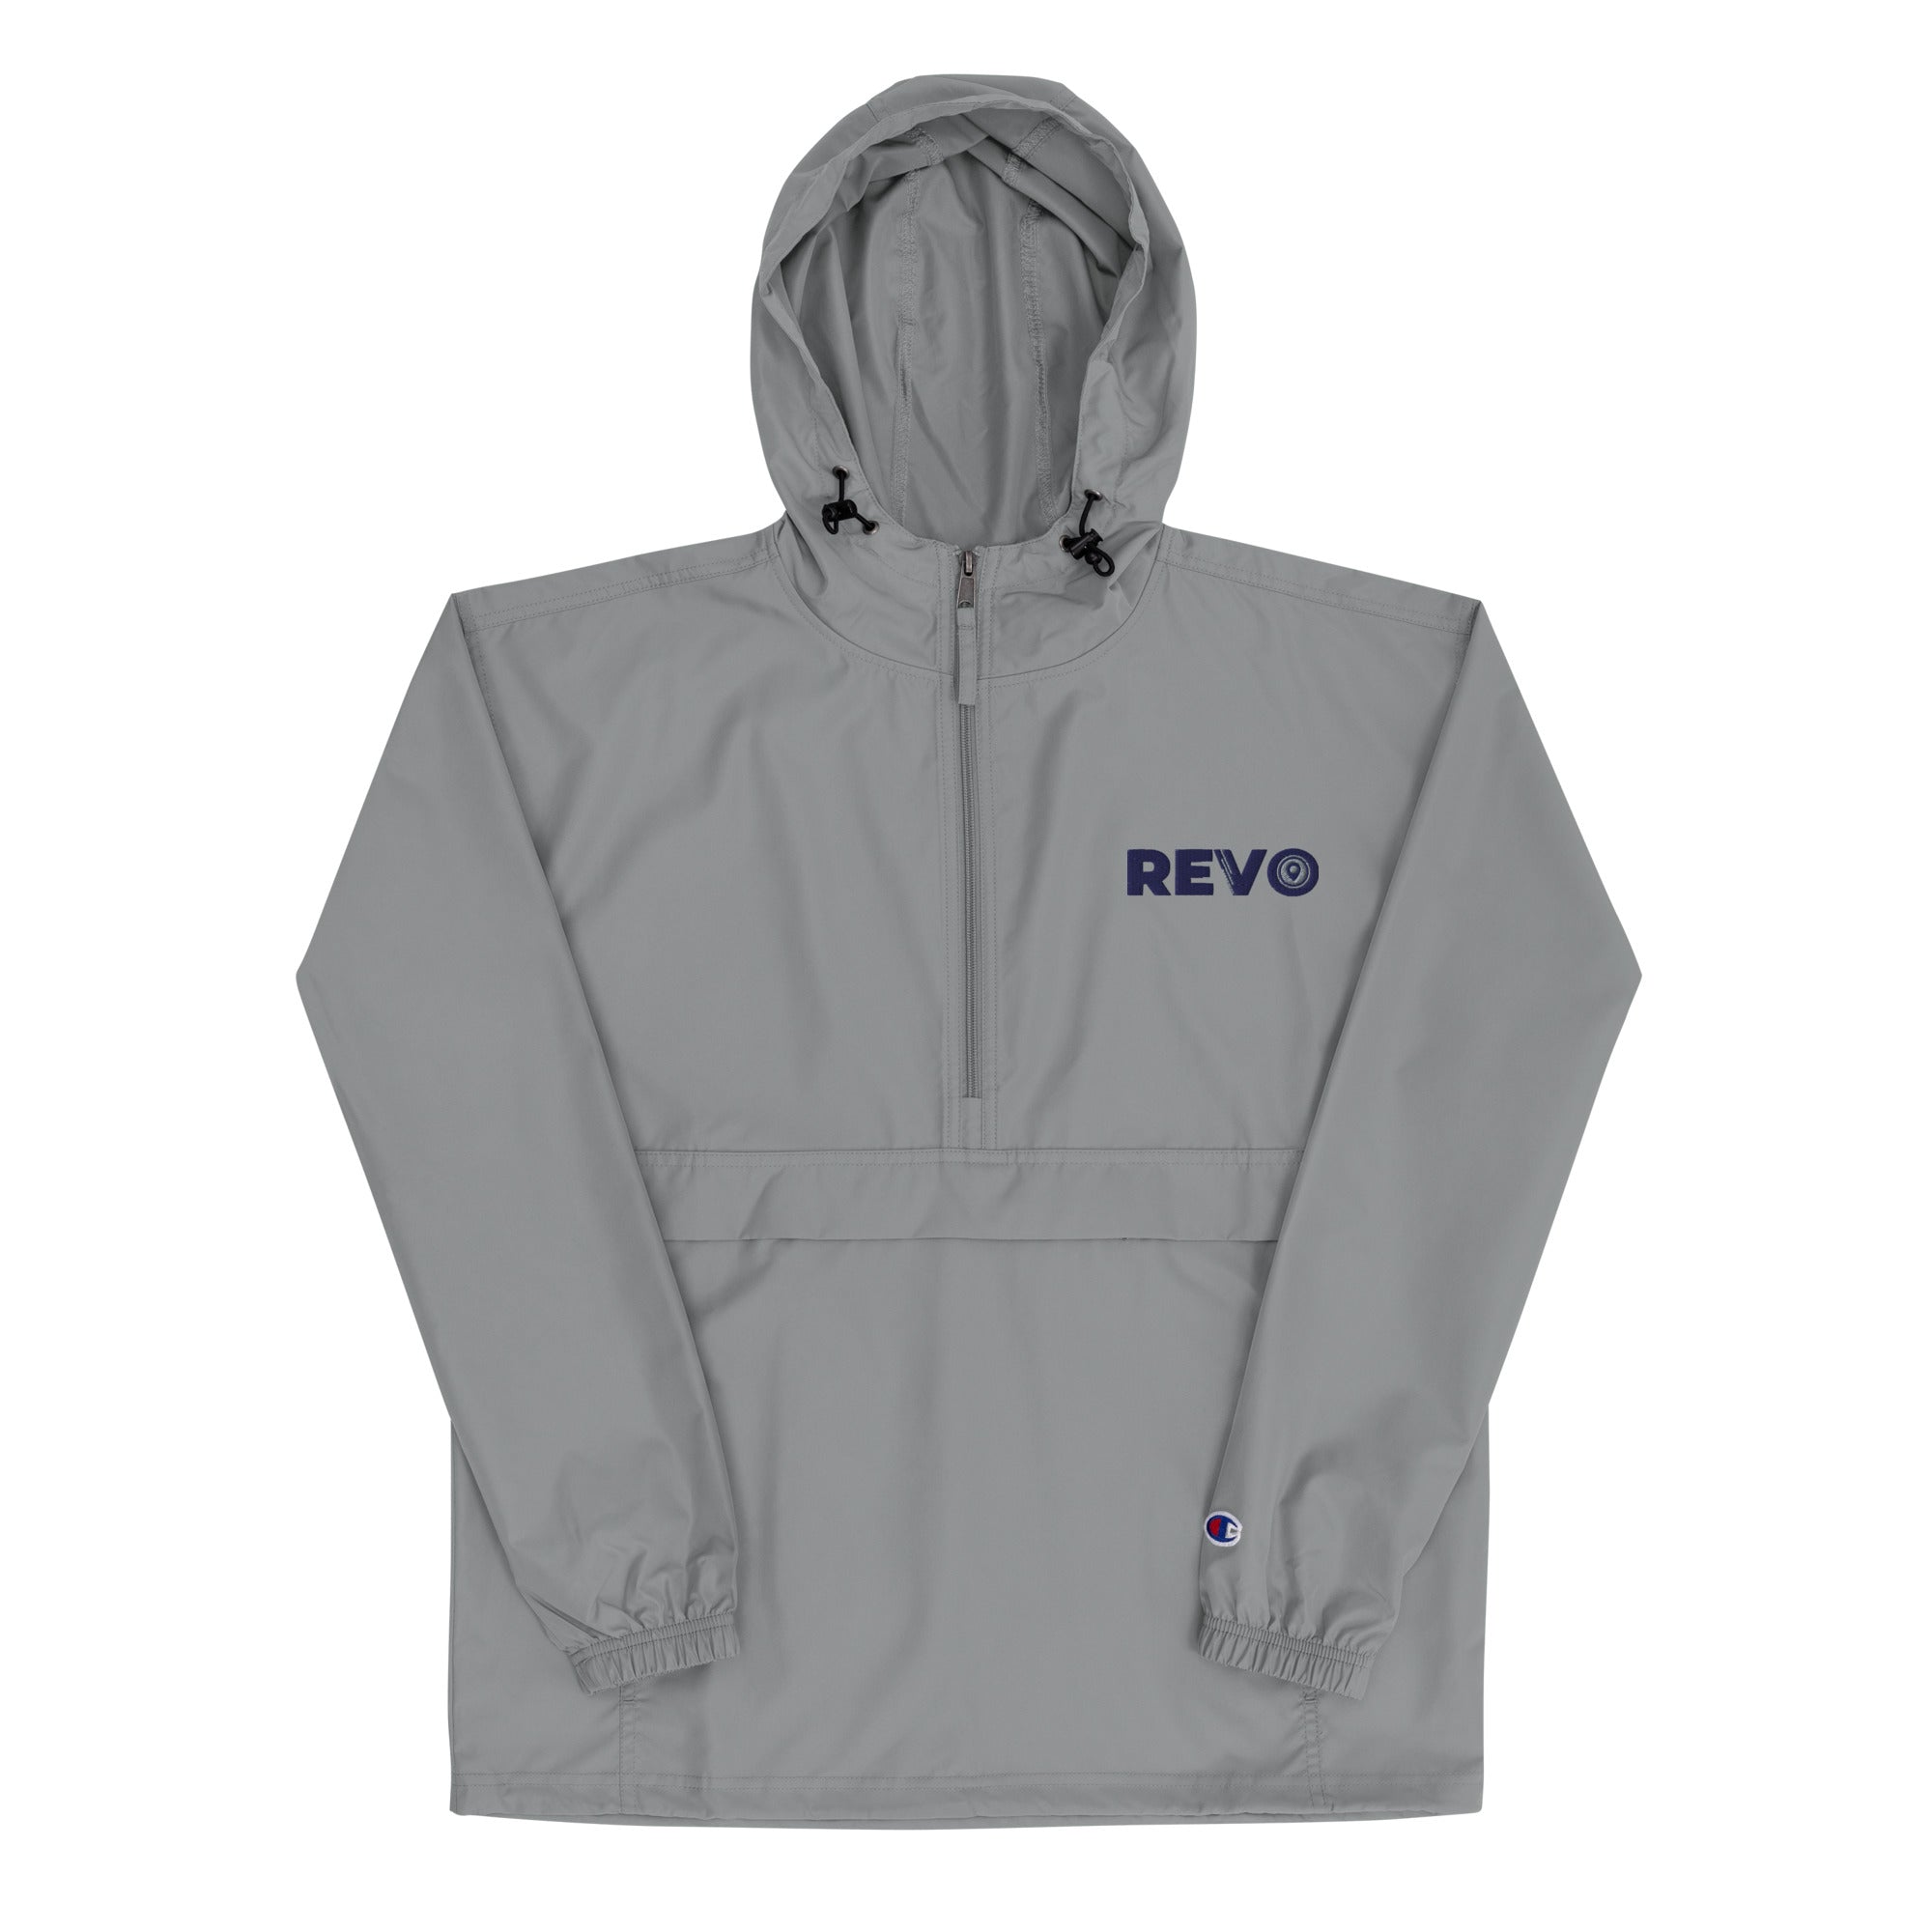 REVO Rideshare Embroidered Champion Packable Jacket v2